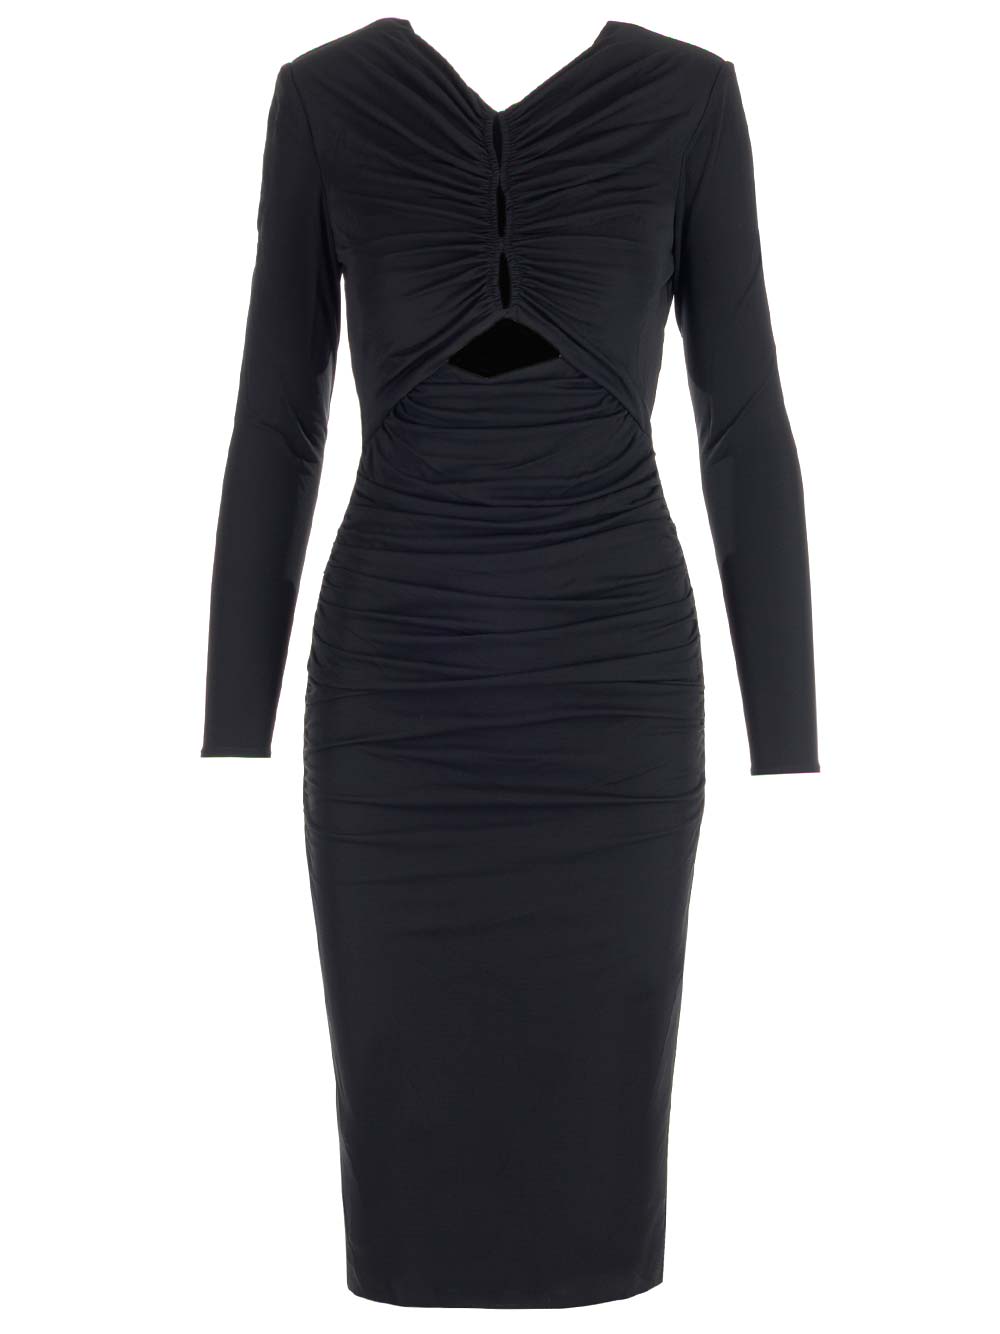 ROLAND MOURET MIDI DRESS WITH CUT OUT